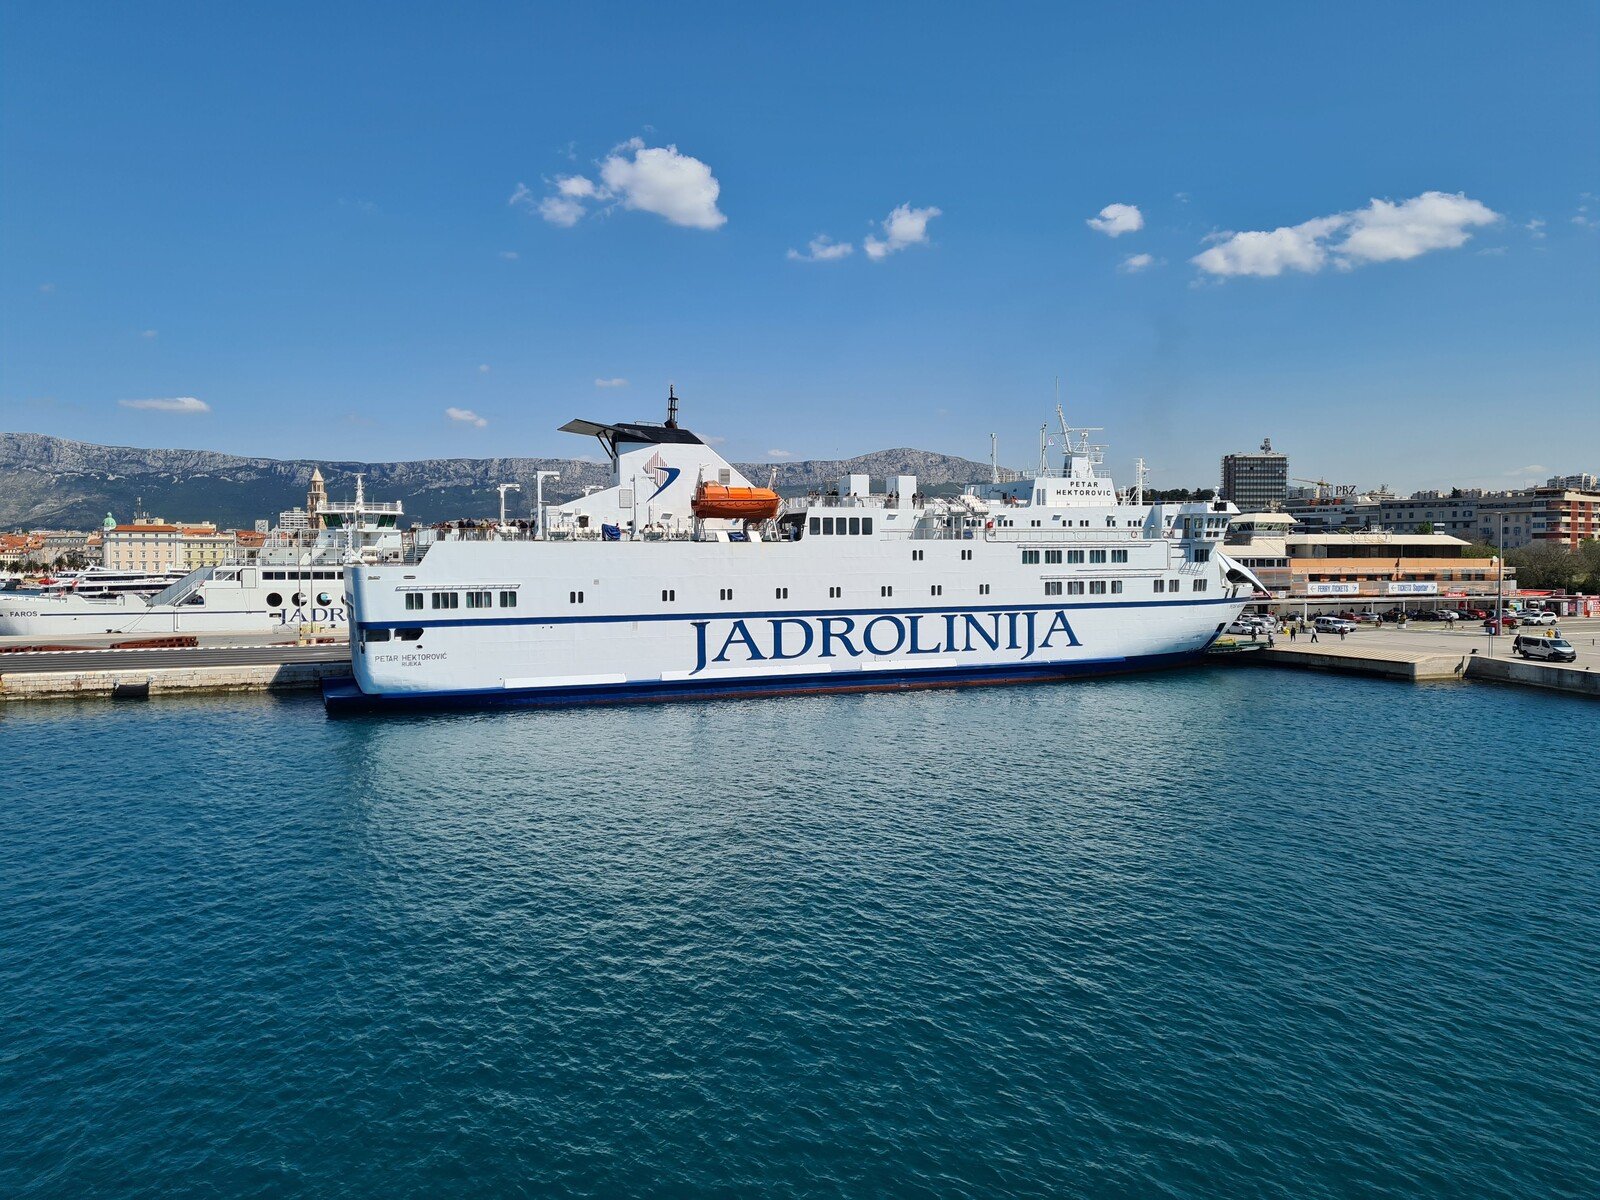 A white ferry boat docked at port with blue writing on the side that reads "jadrolinija"